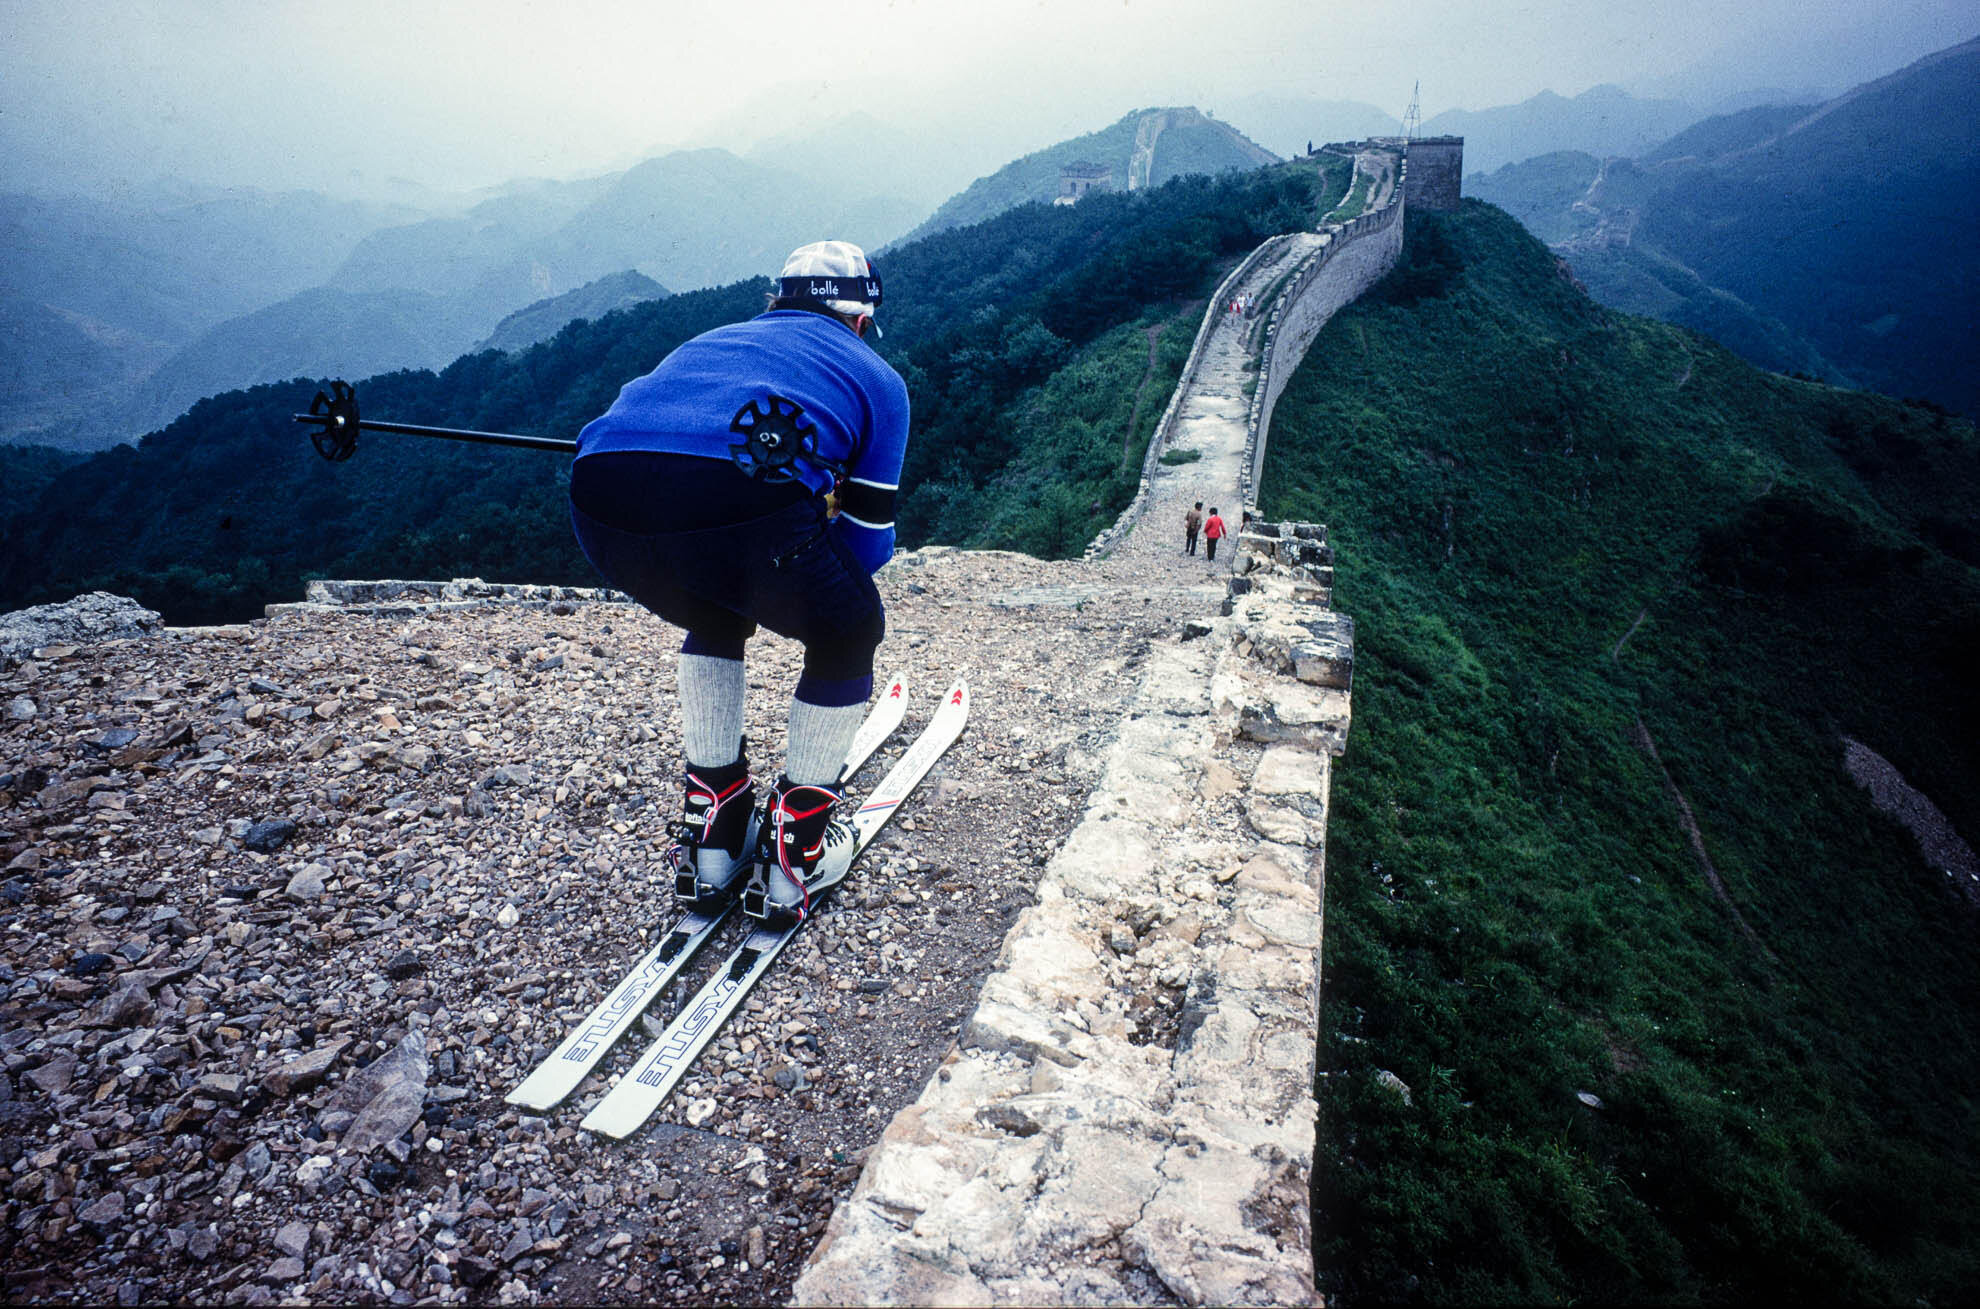  Lloyd Gallagher skis the Great Wall, 1981, during Muztagata expedition. Photo by Pat Morrow. 